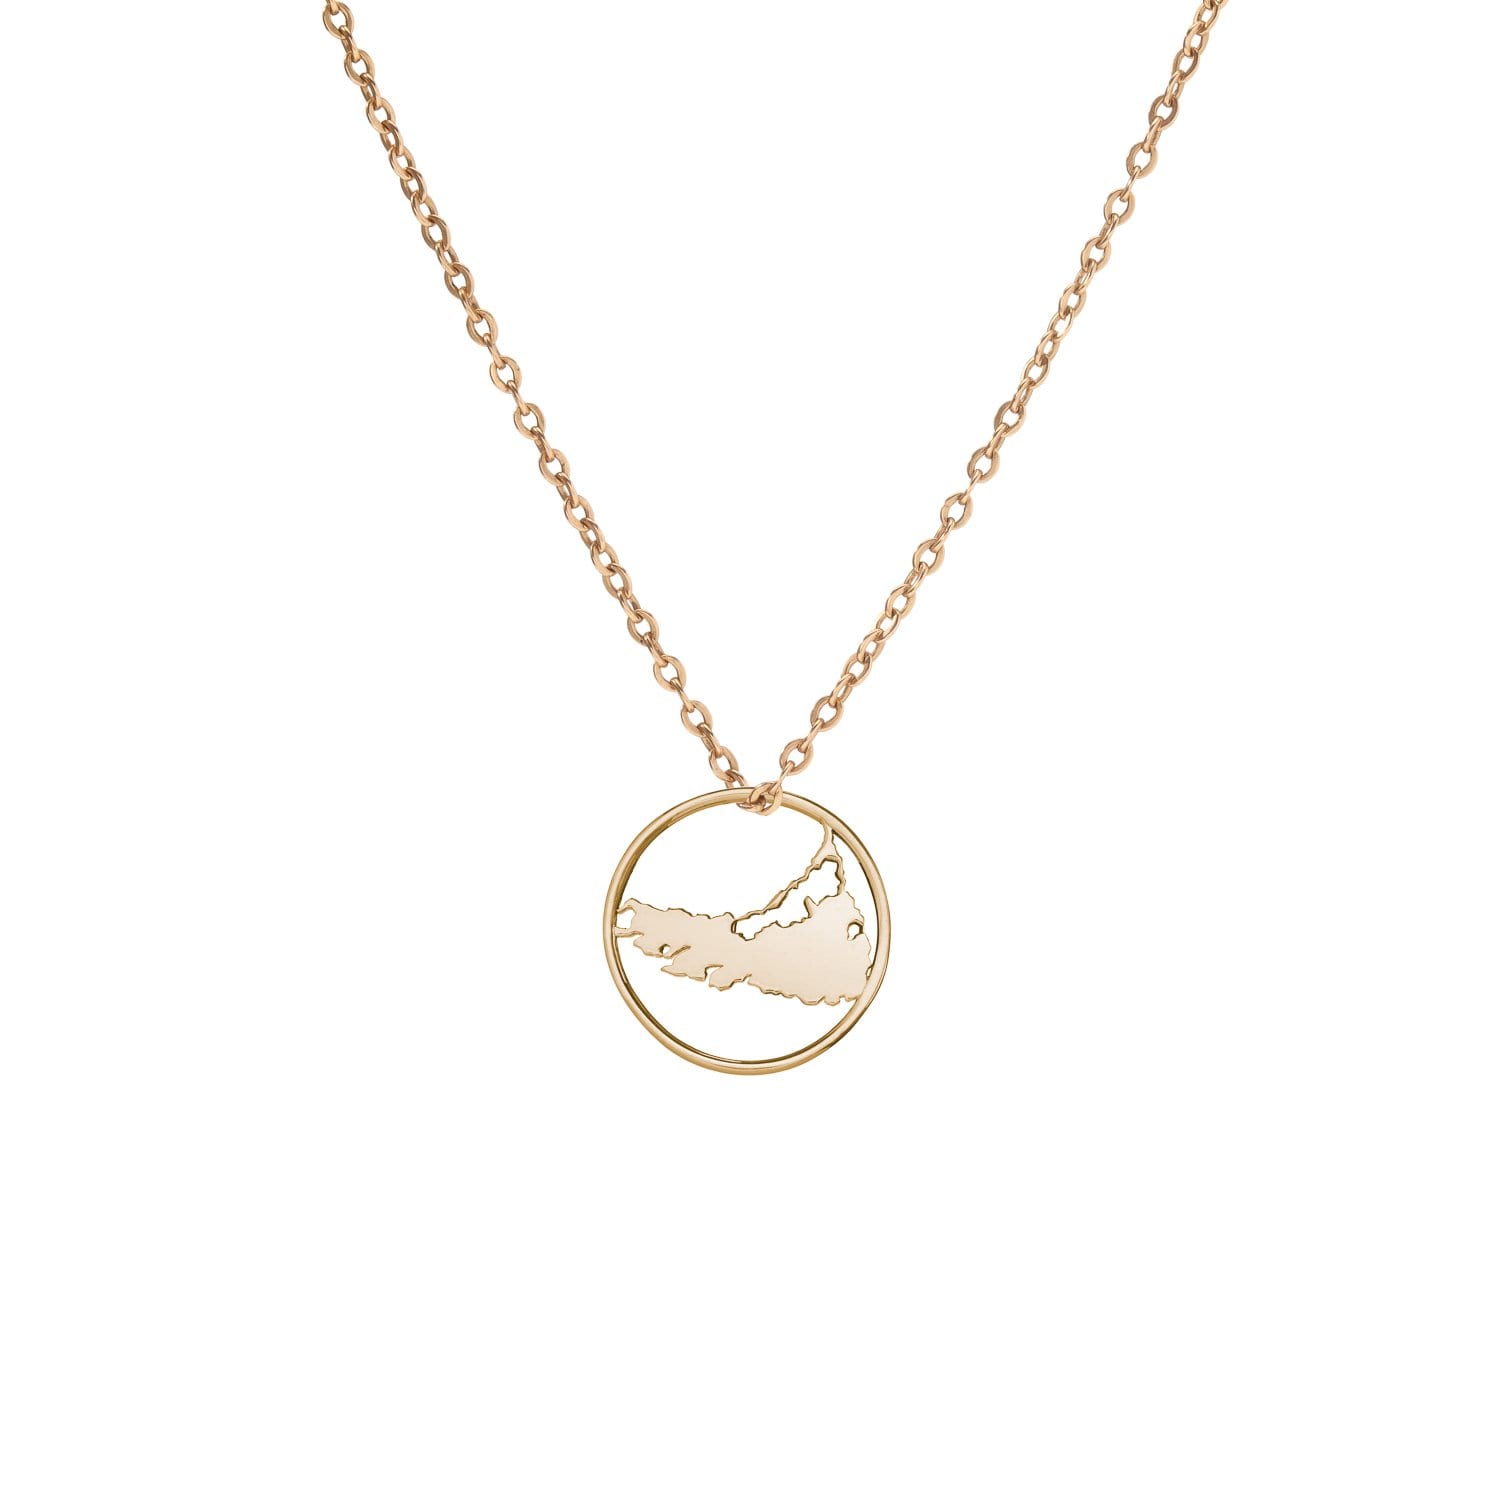 Vincents Fine Jewelry | Catherine Demarchelier | Nantucket Chained Necklace | CD Charms